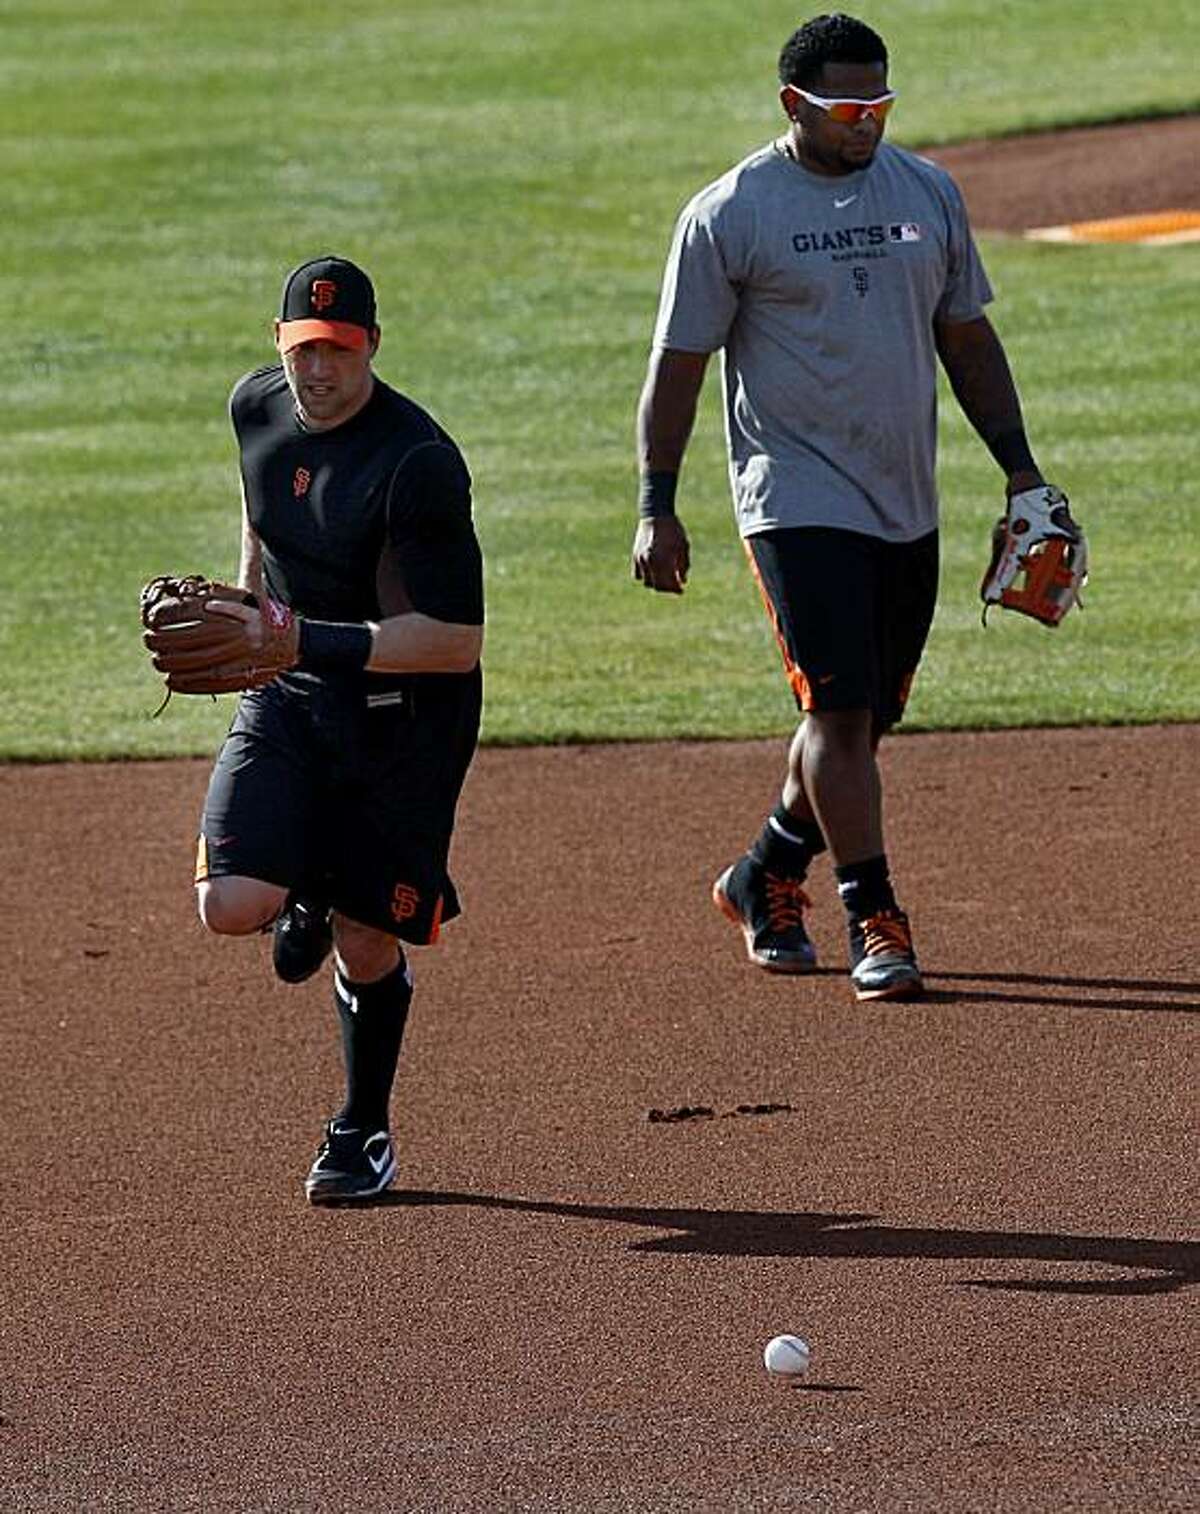 Mark DeRosa (left) and Pablo Sandoval took some grounders at third base. The San Francisco Giants held their second workout of the spring training season at Scottsdale Stadium in Arizona Wednesday February 16, 2011.